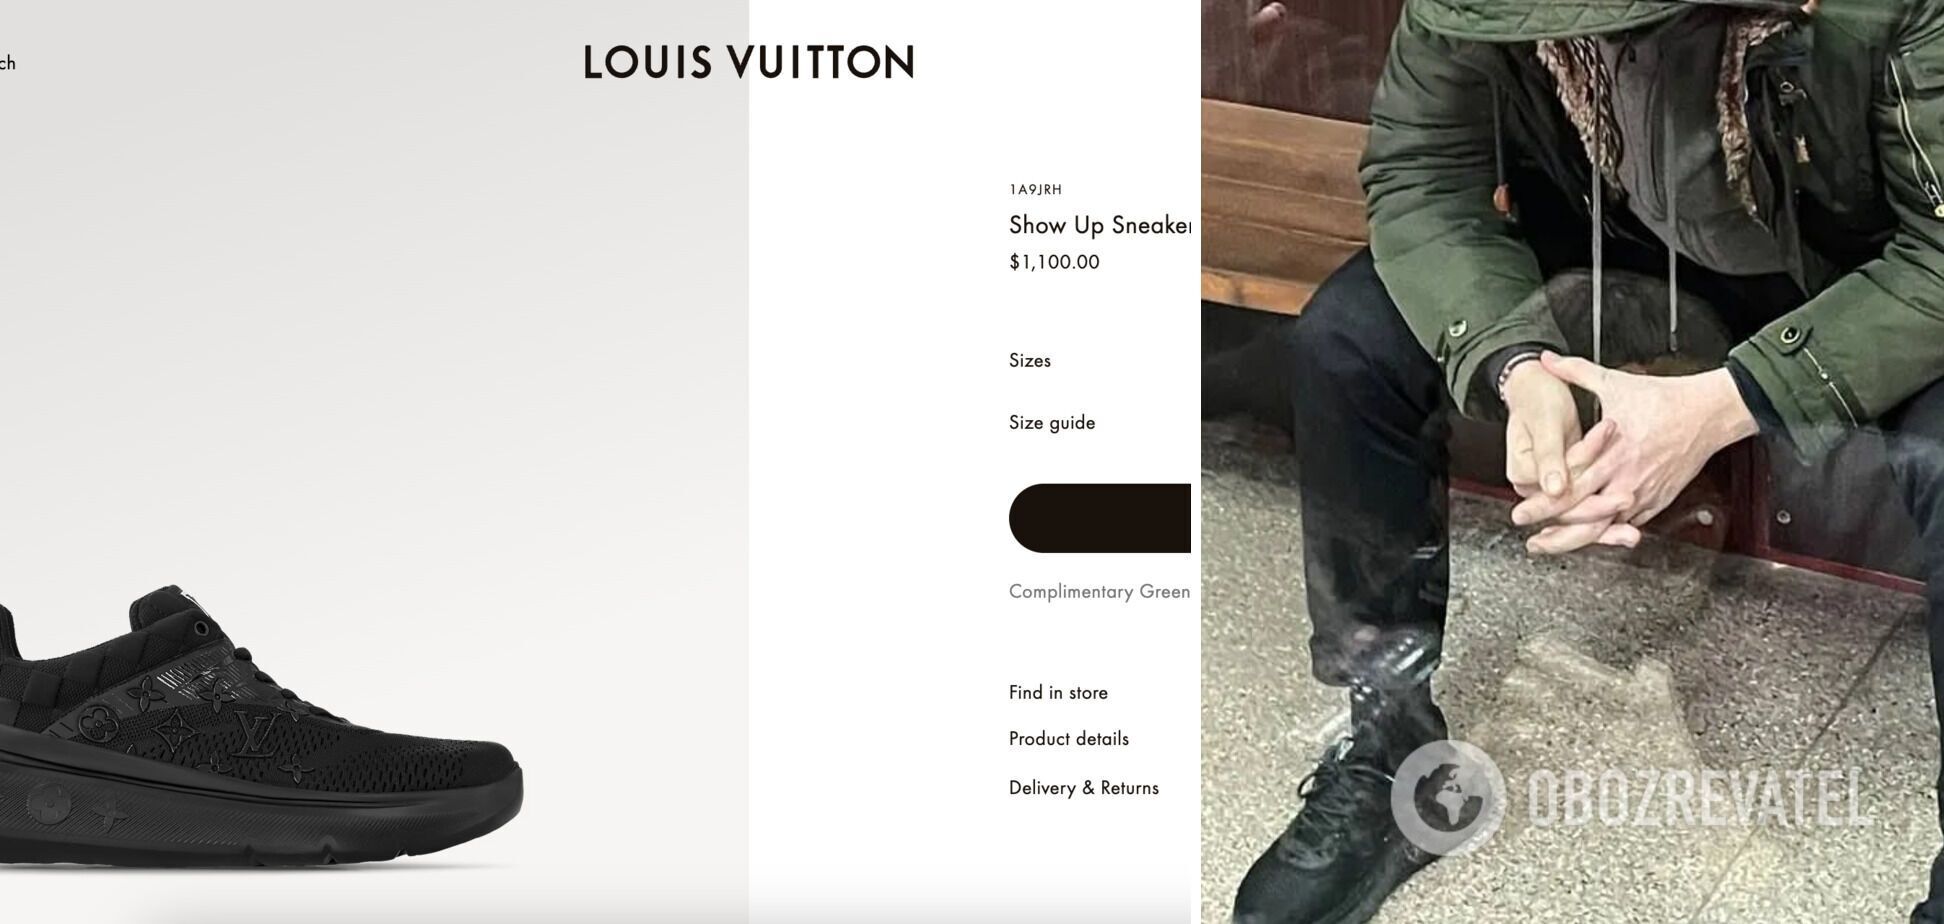 Hrynkevych's son, accused of fake purchases for AFU, shows off Louis Vuitton sneakers worth about 1,000 euros